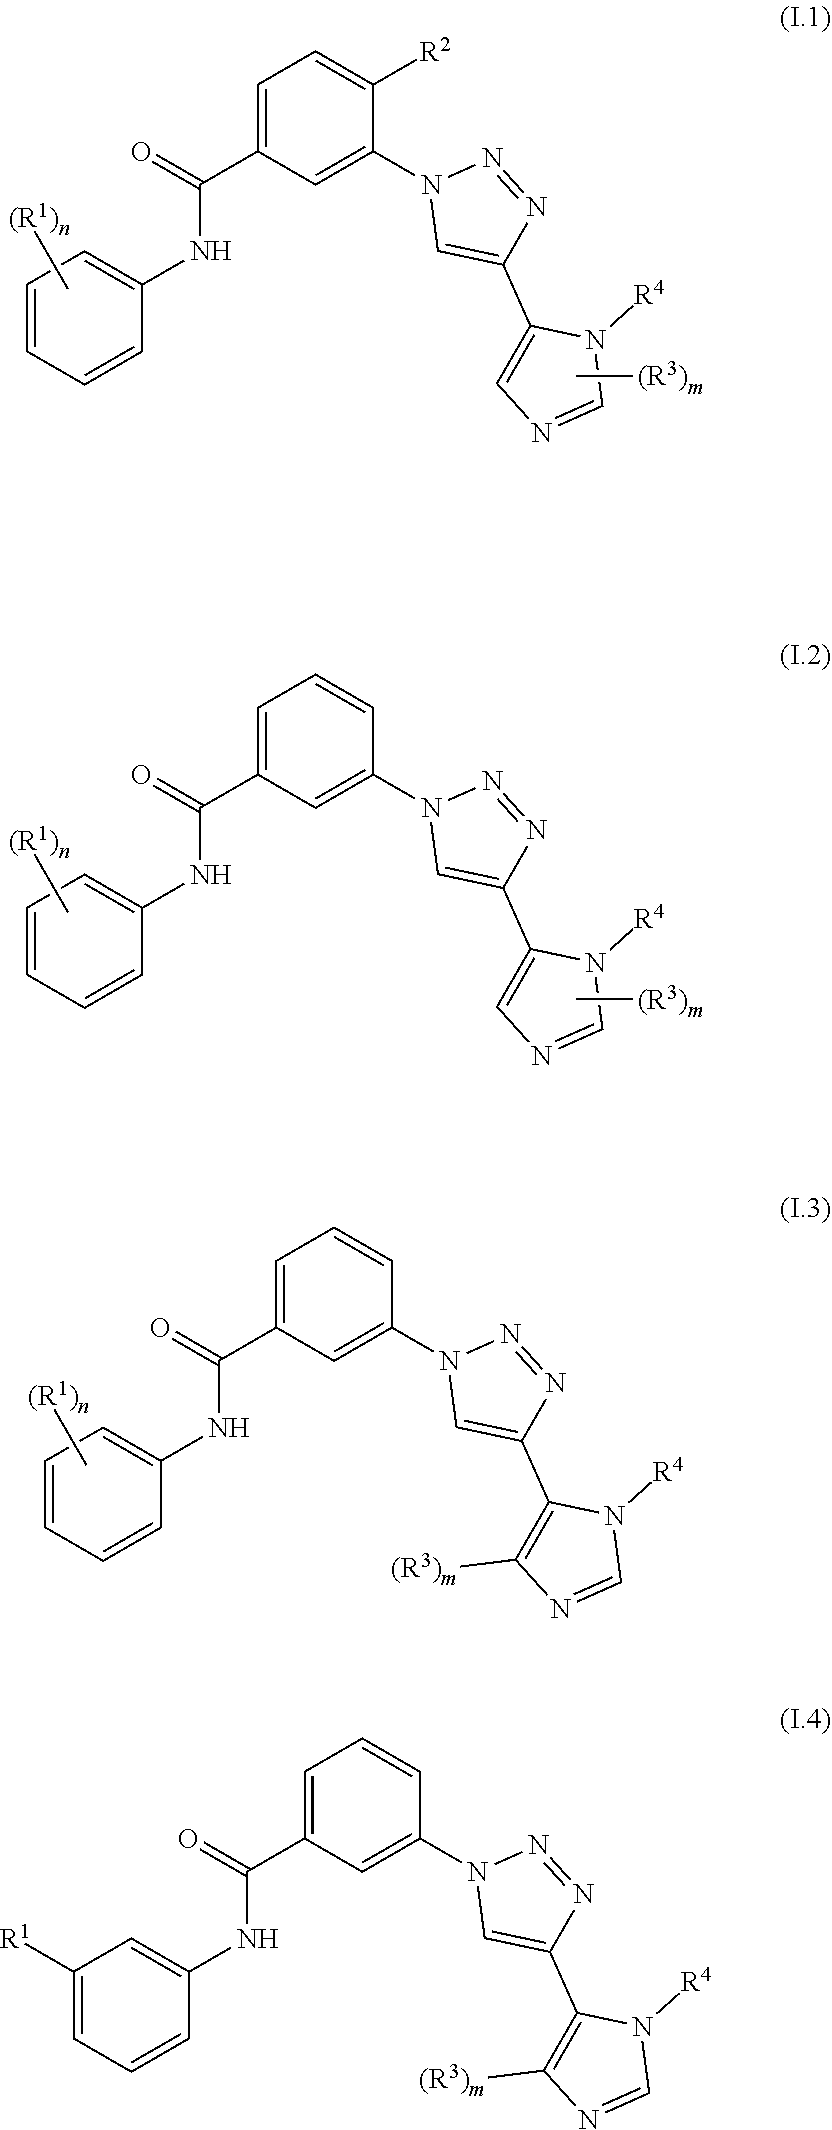 Triazole benzamide derivatives as gpr142 agonists